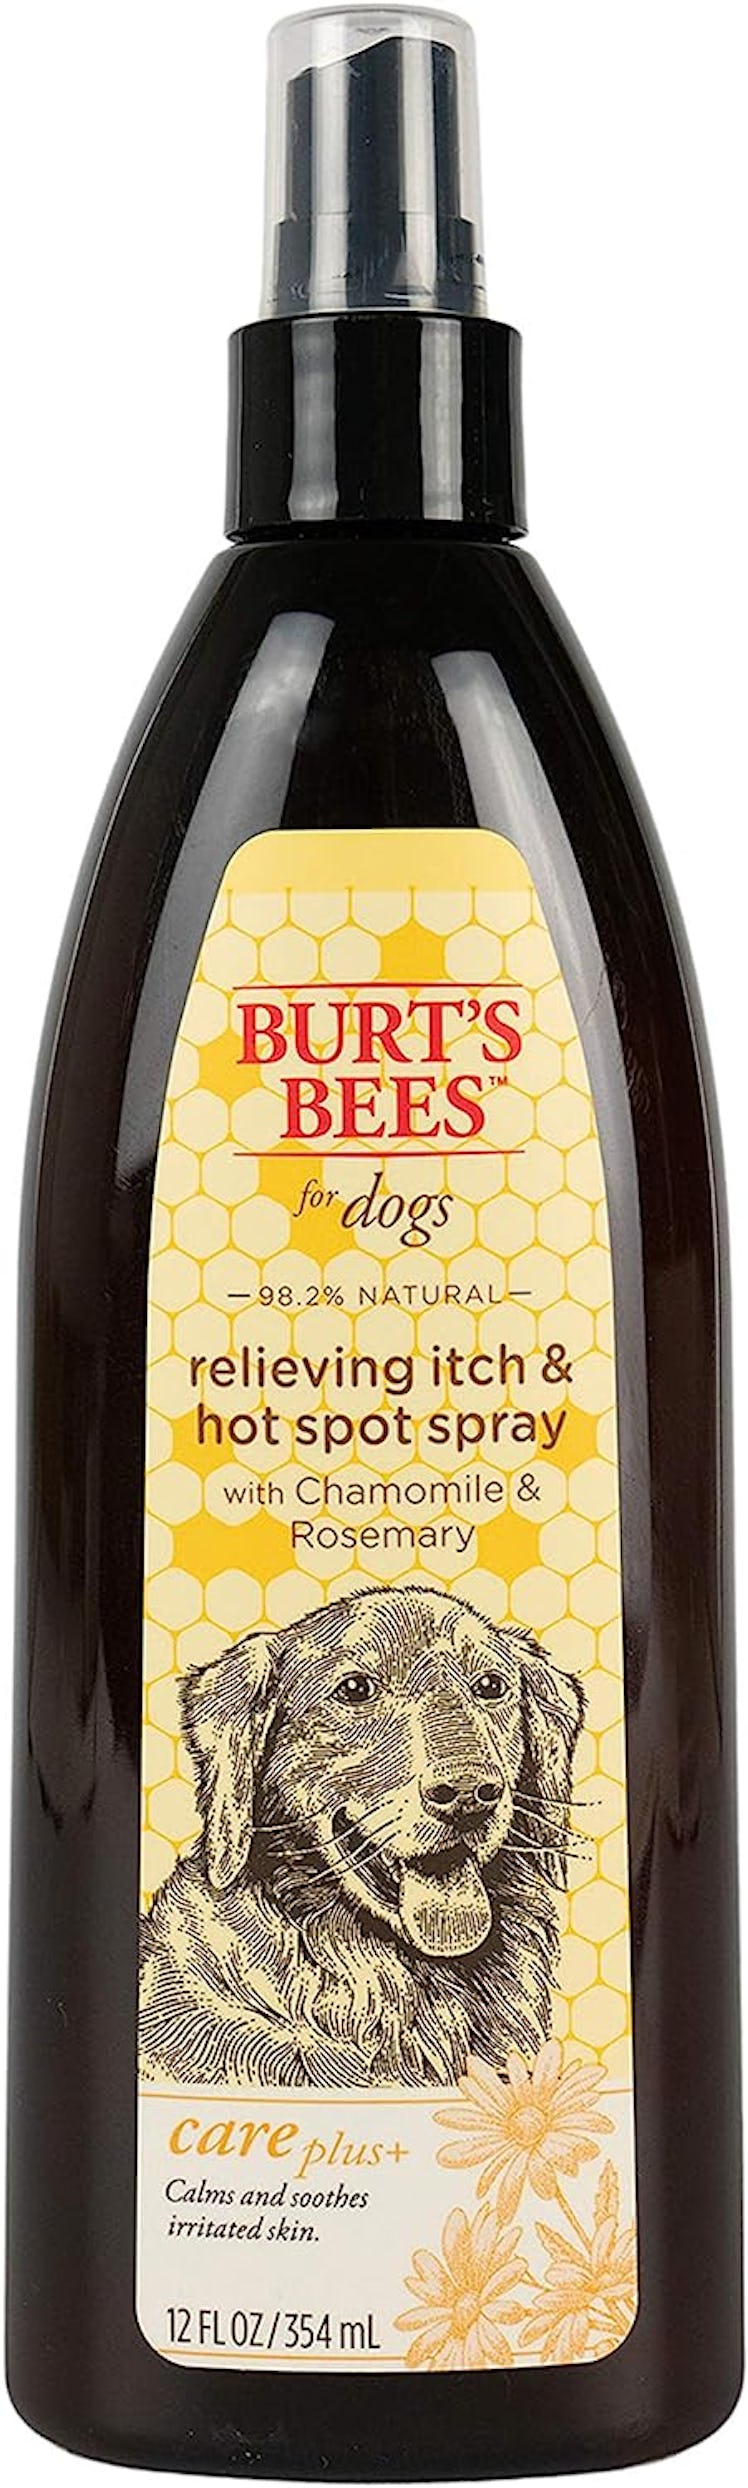 Burt's Bees for Dogs Relieving Itch & Hot Spot Spray